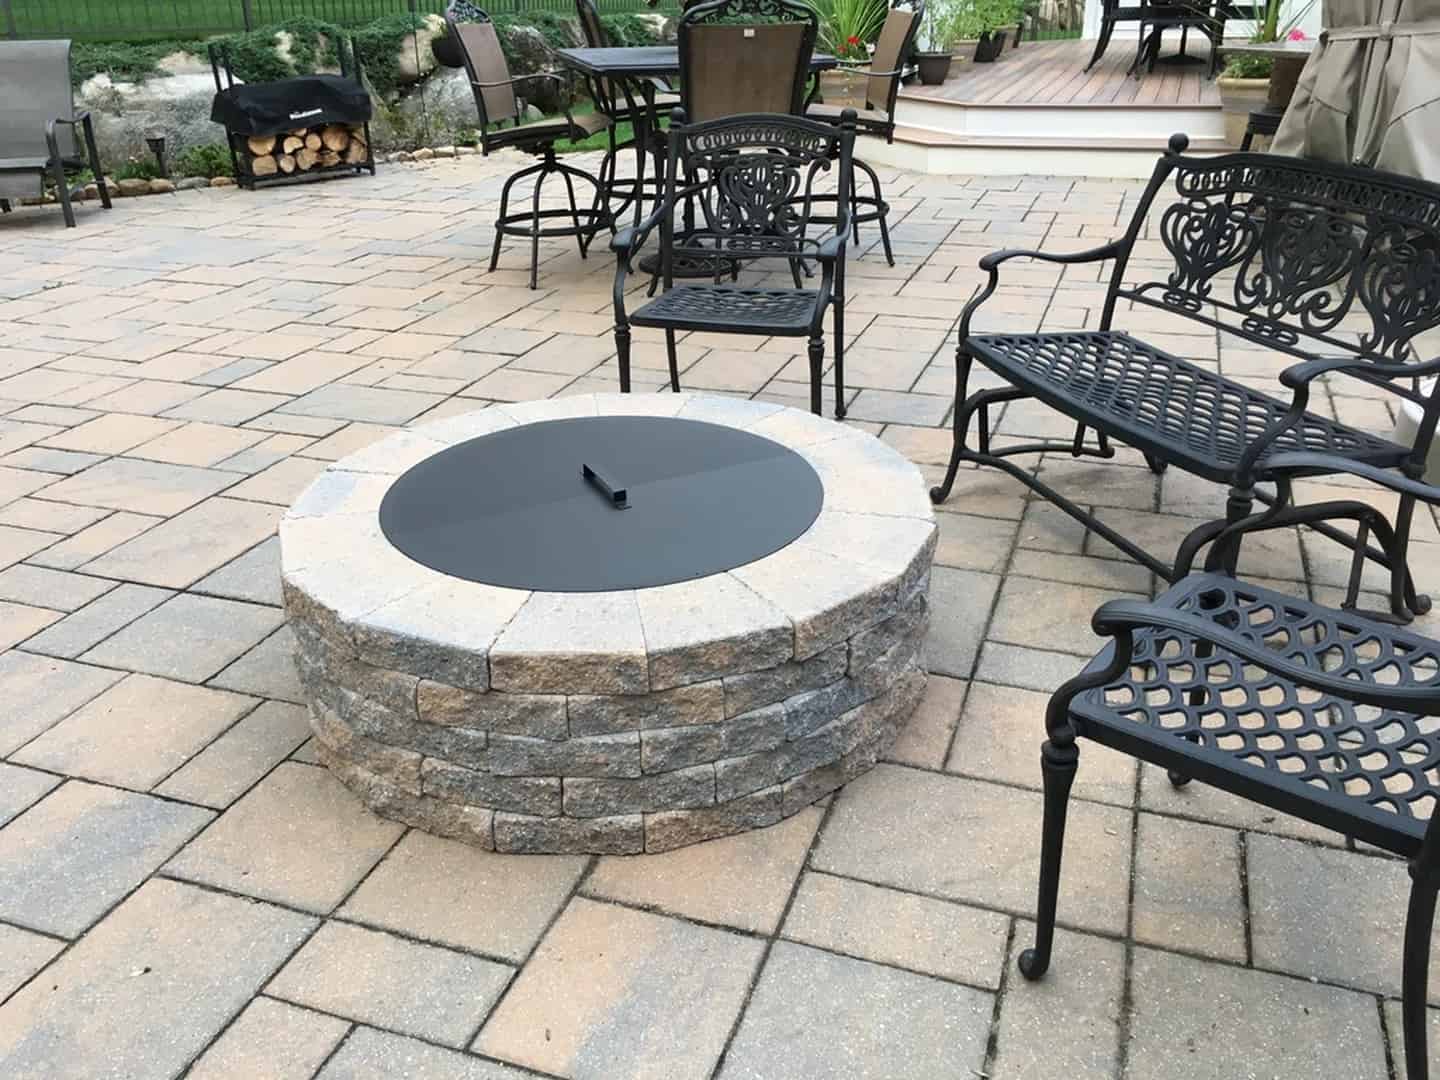 Waterproof Windproof Anti-UV Heavy D Saking Patio Fire Pit Cover Round 44 inch 